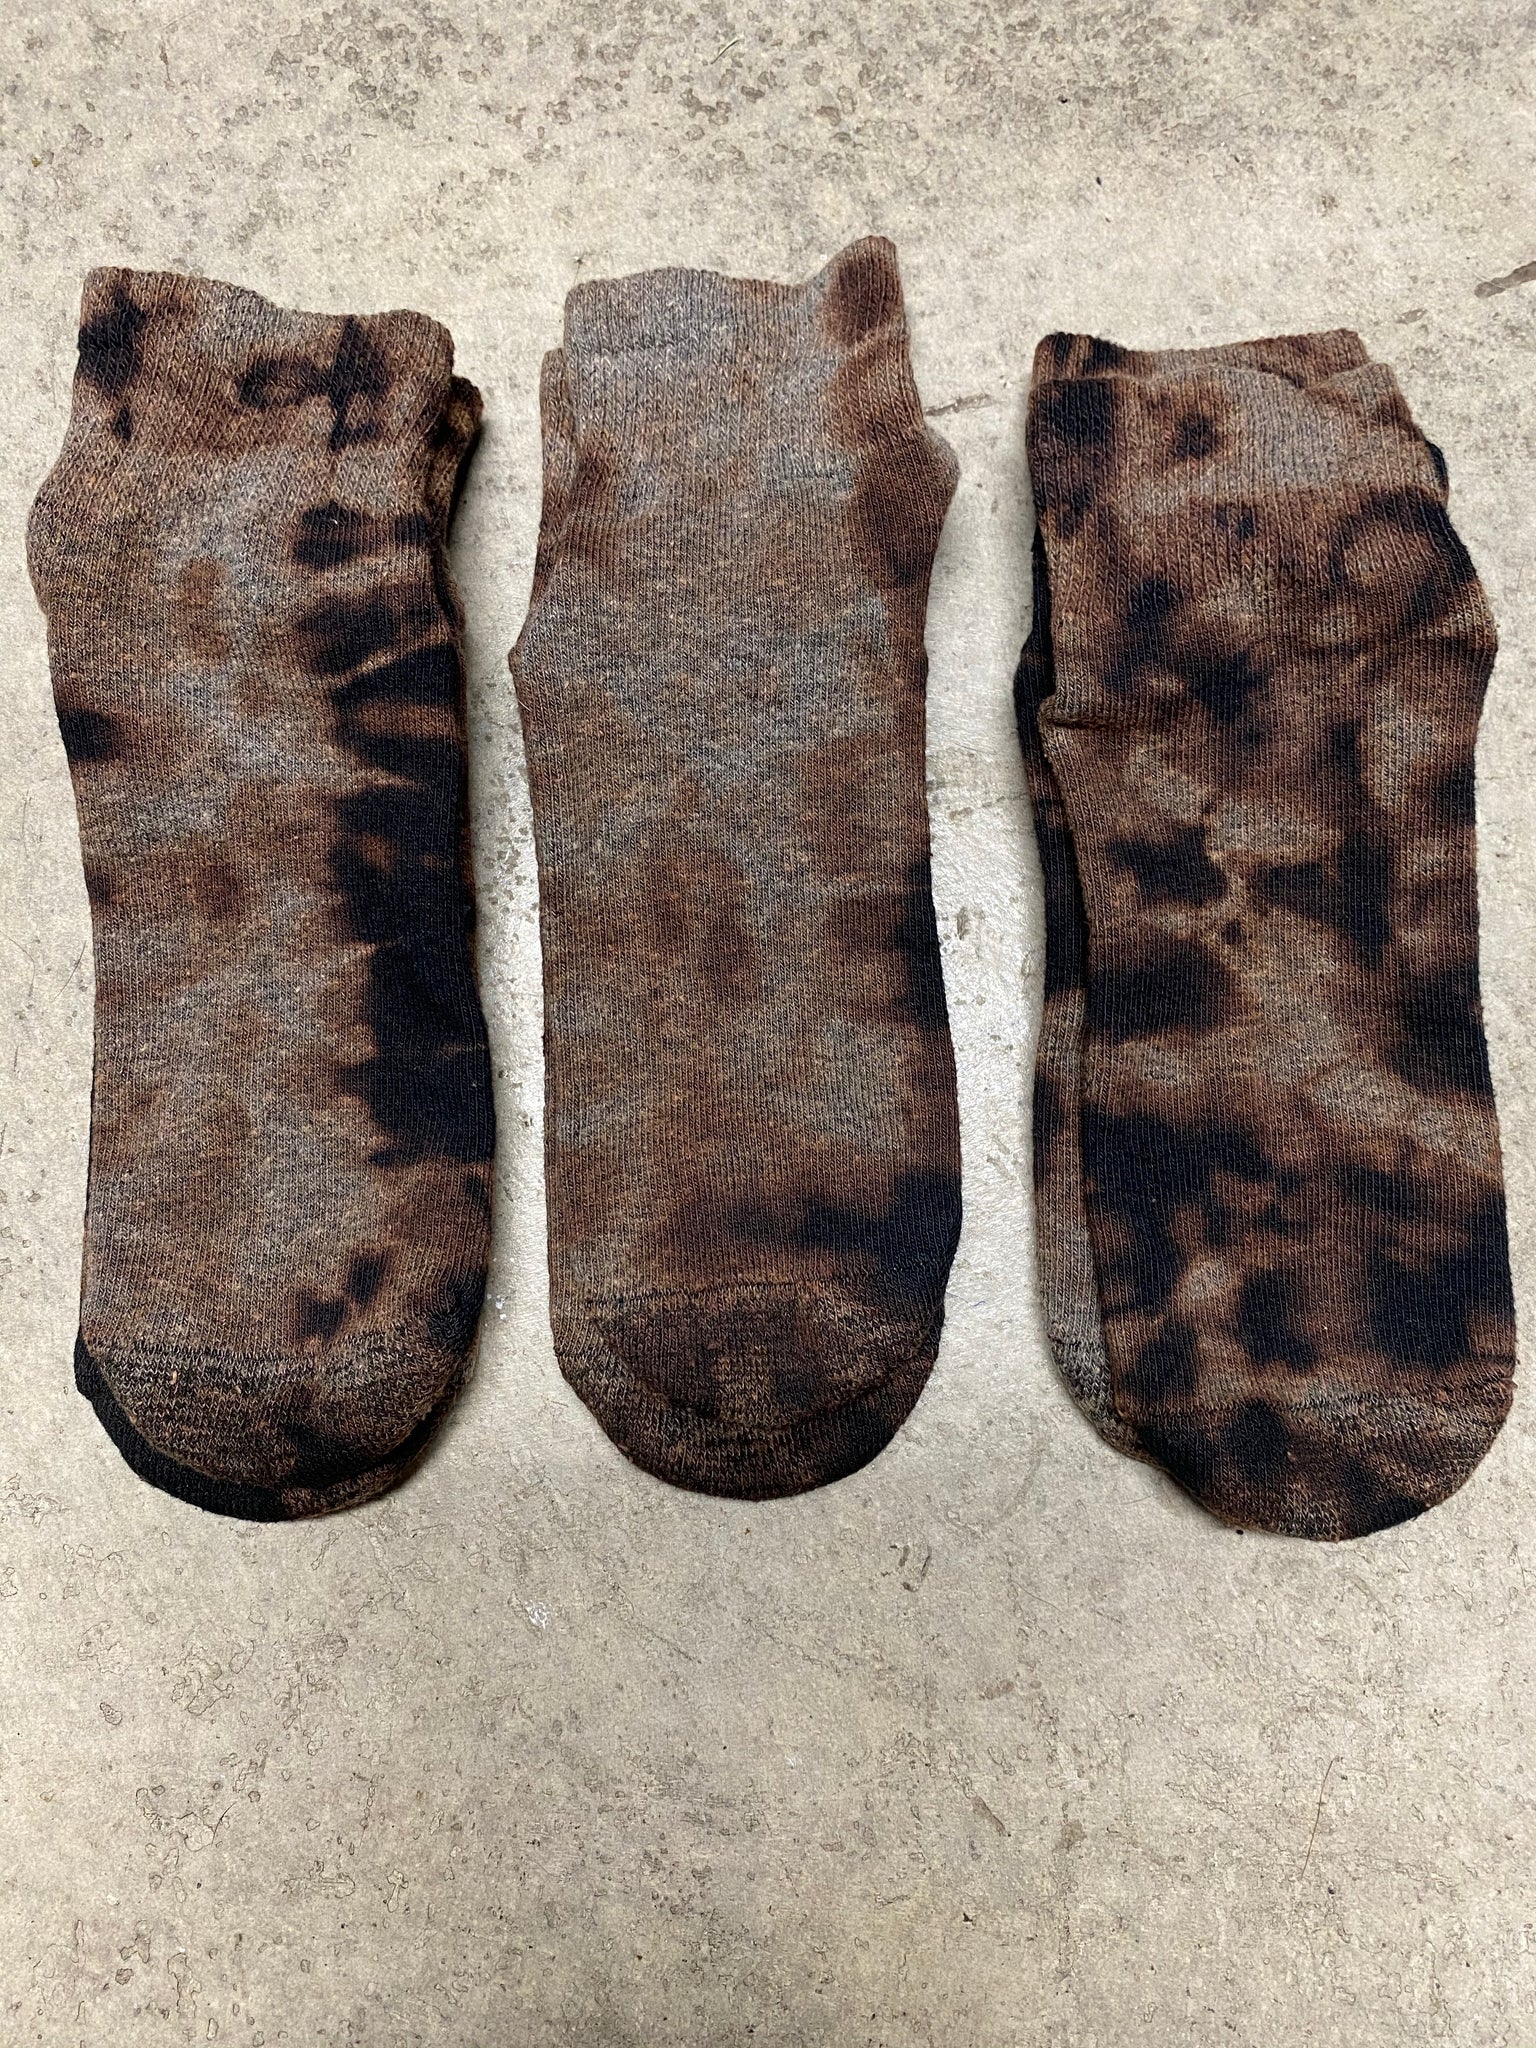 Hand bleached Ankle socks